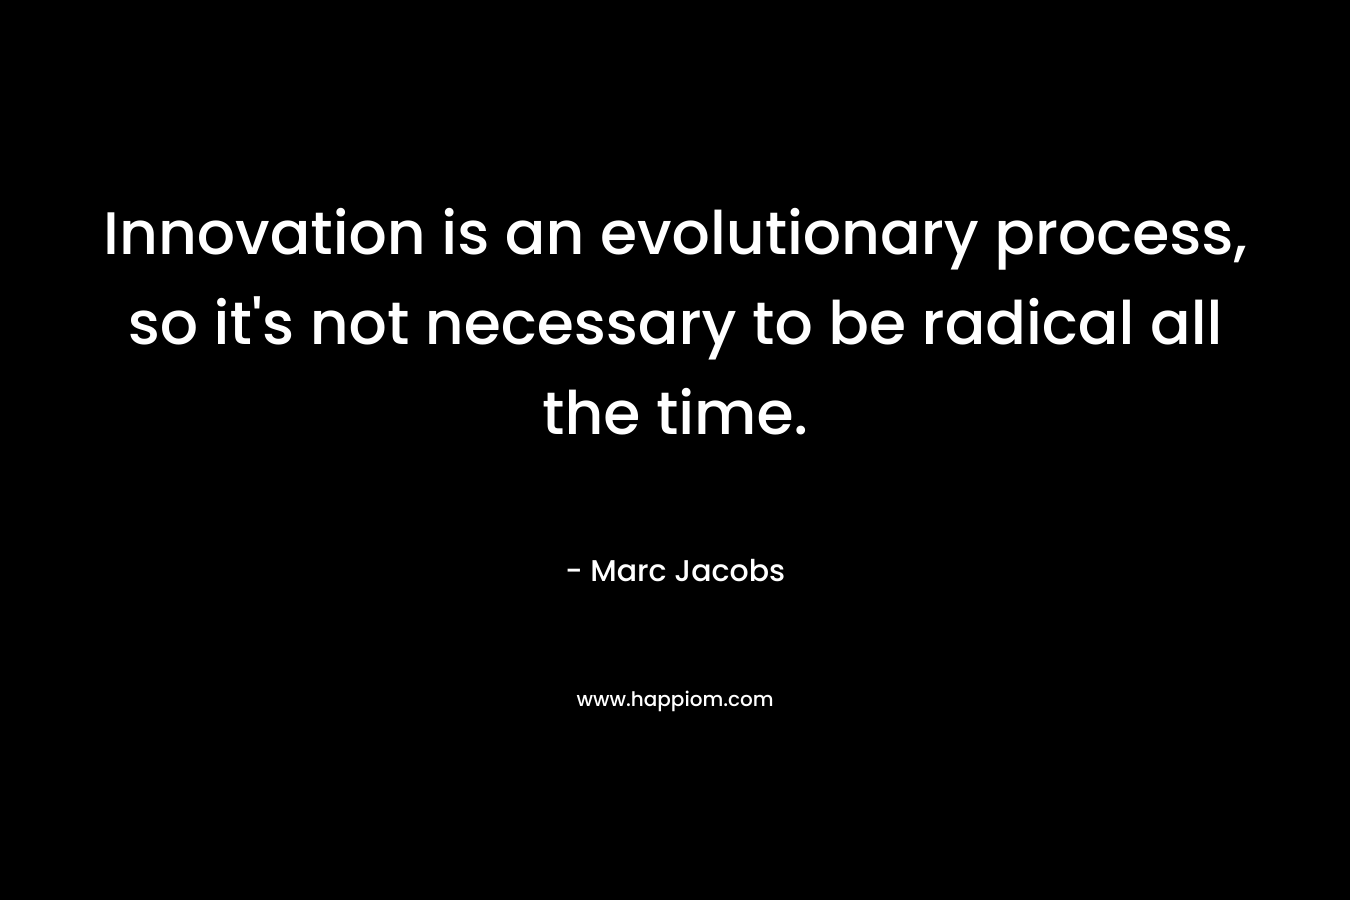 Innovation is an evolutionary process, so it’s not necessary to be radical all the time. – Marc Jacobs